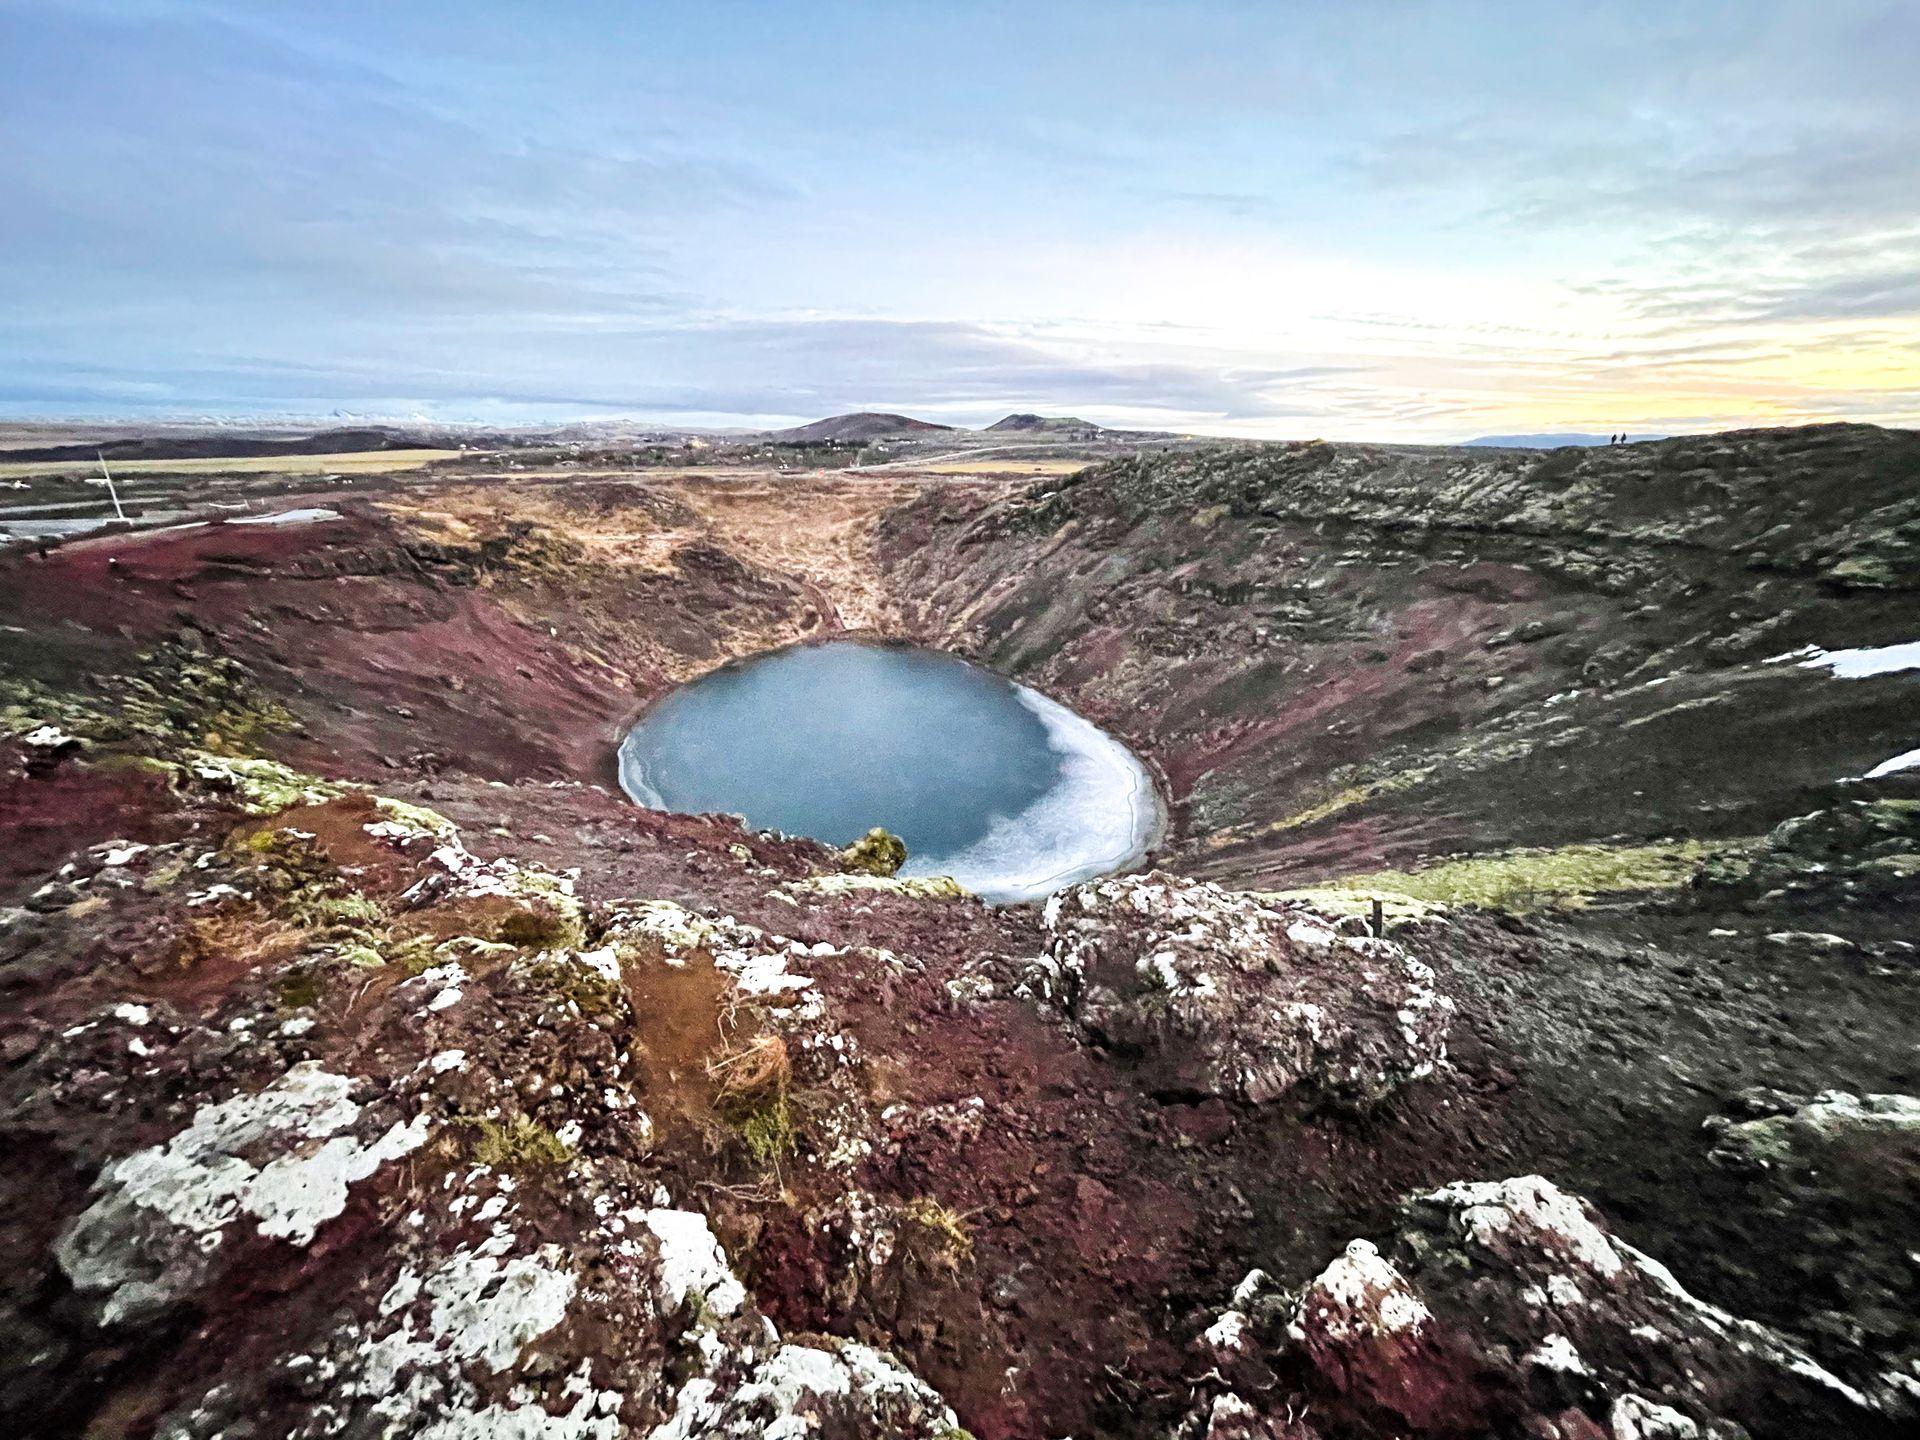 Looking down at a round crater. The crater has blue water and the cliff faces have a red color.